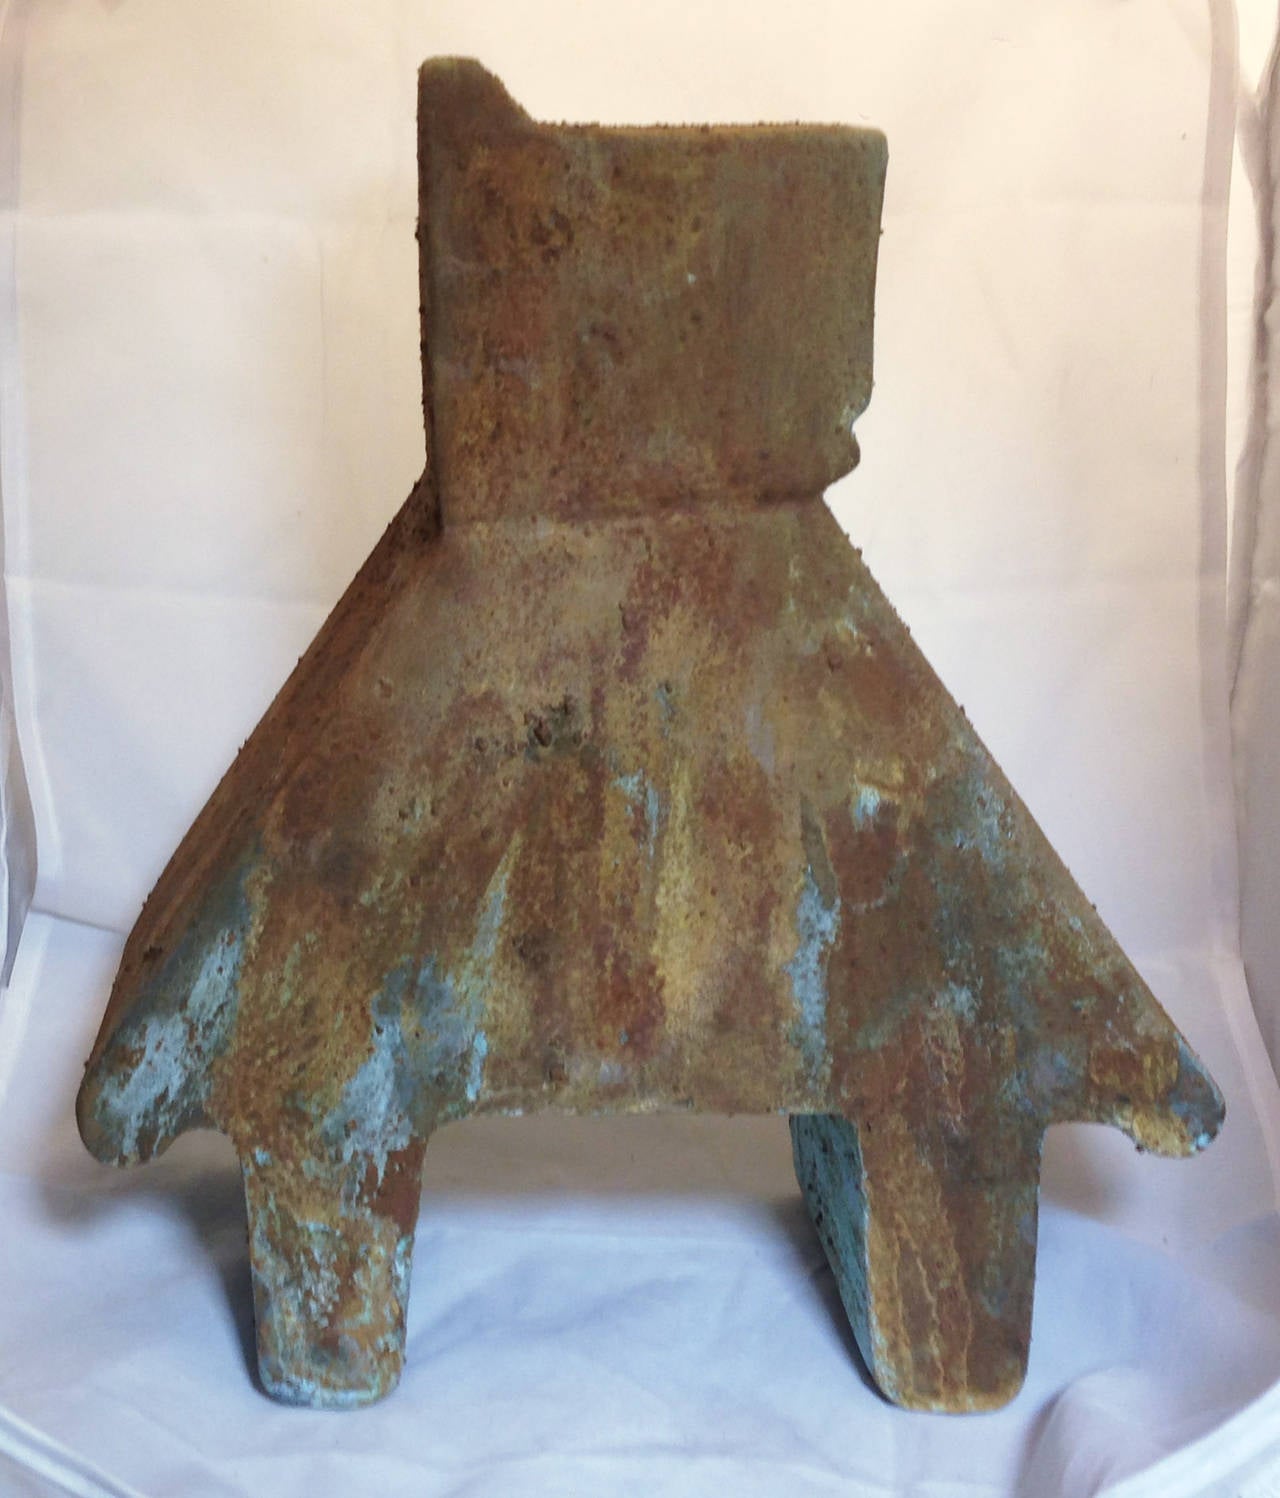 Ceramic sculpture made by Mexican artist Miguel Castro Leñero, signed. Iron rust patina.